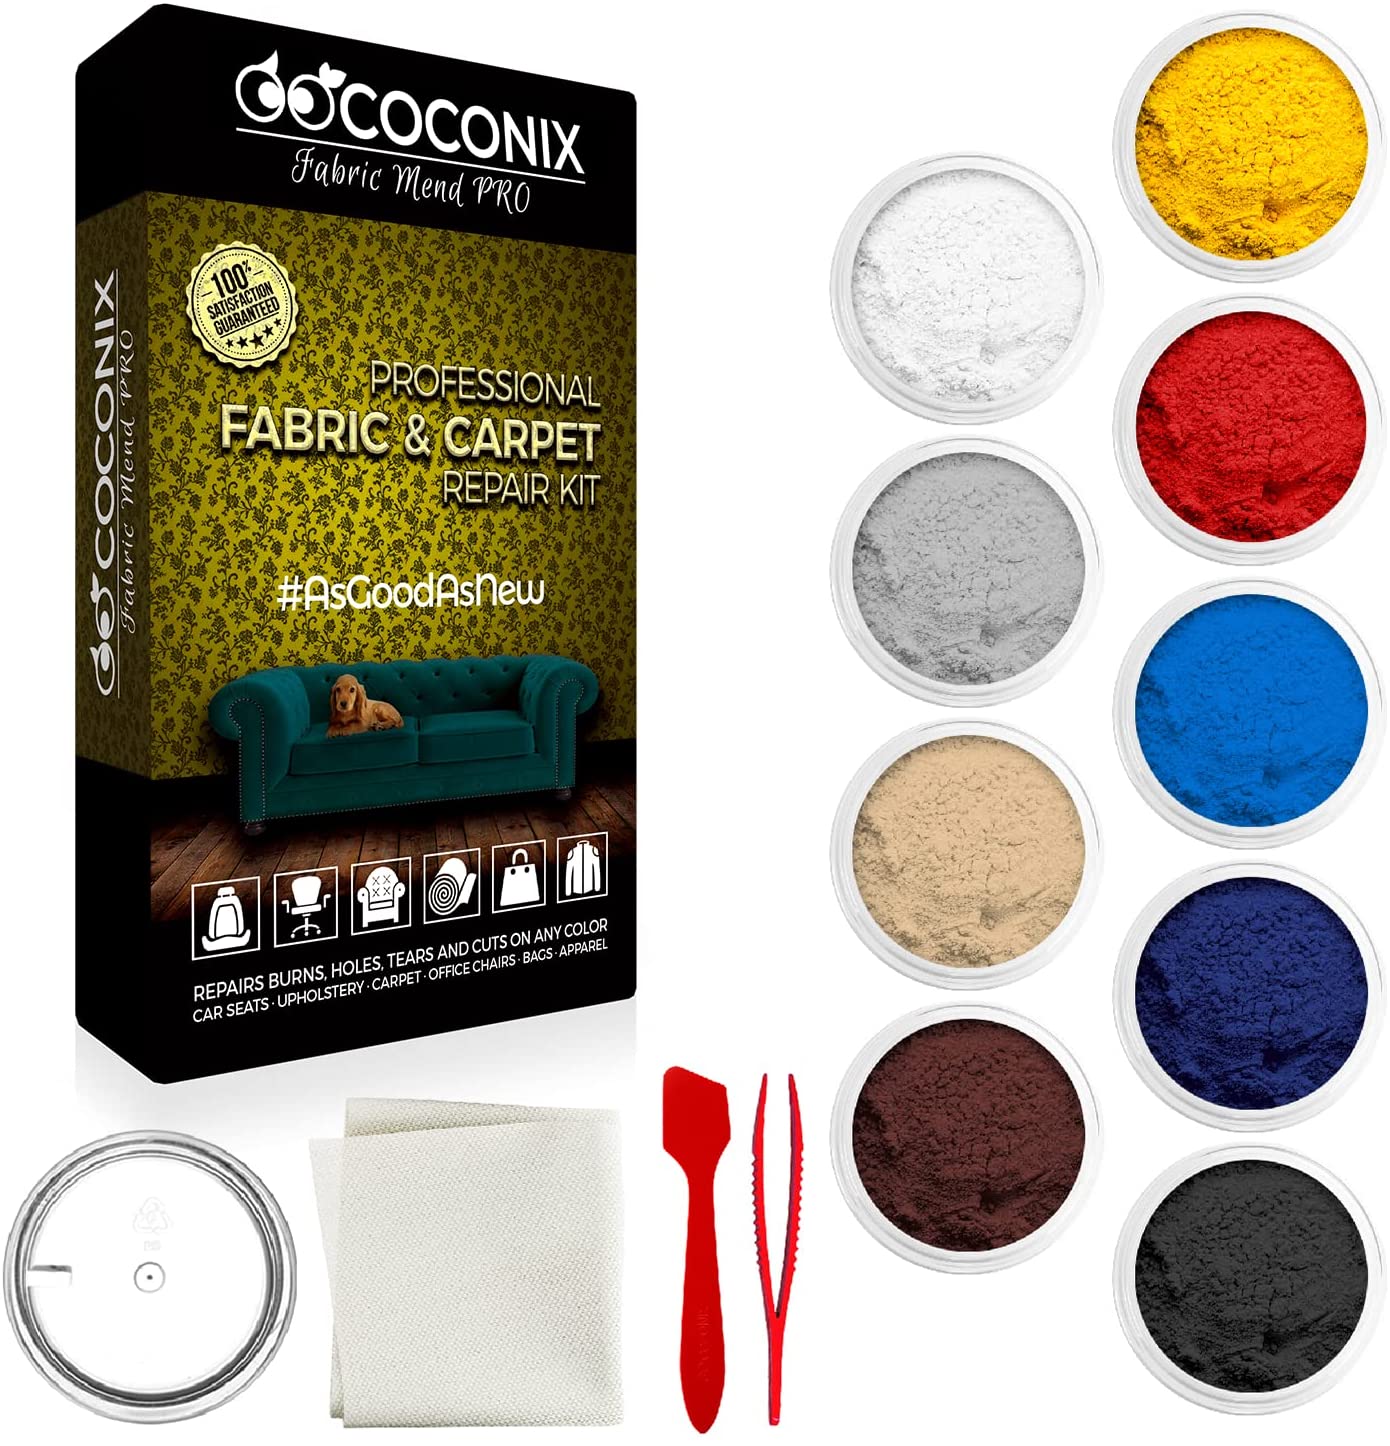 Coconix Fabric and Carpet Repair Kit - Repairer of Your Car Seat, Couch,  Furniture, Upholstery or Jacket - Fixes Burn Holes, Tear or Rips. Super  Easy Instructions to Match Any Color, Pattern